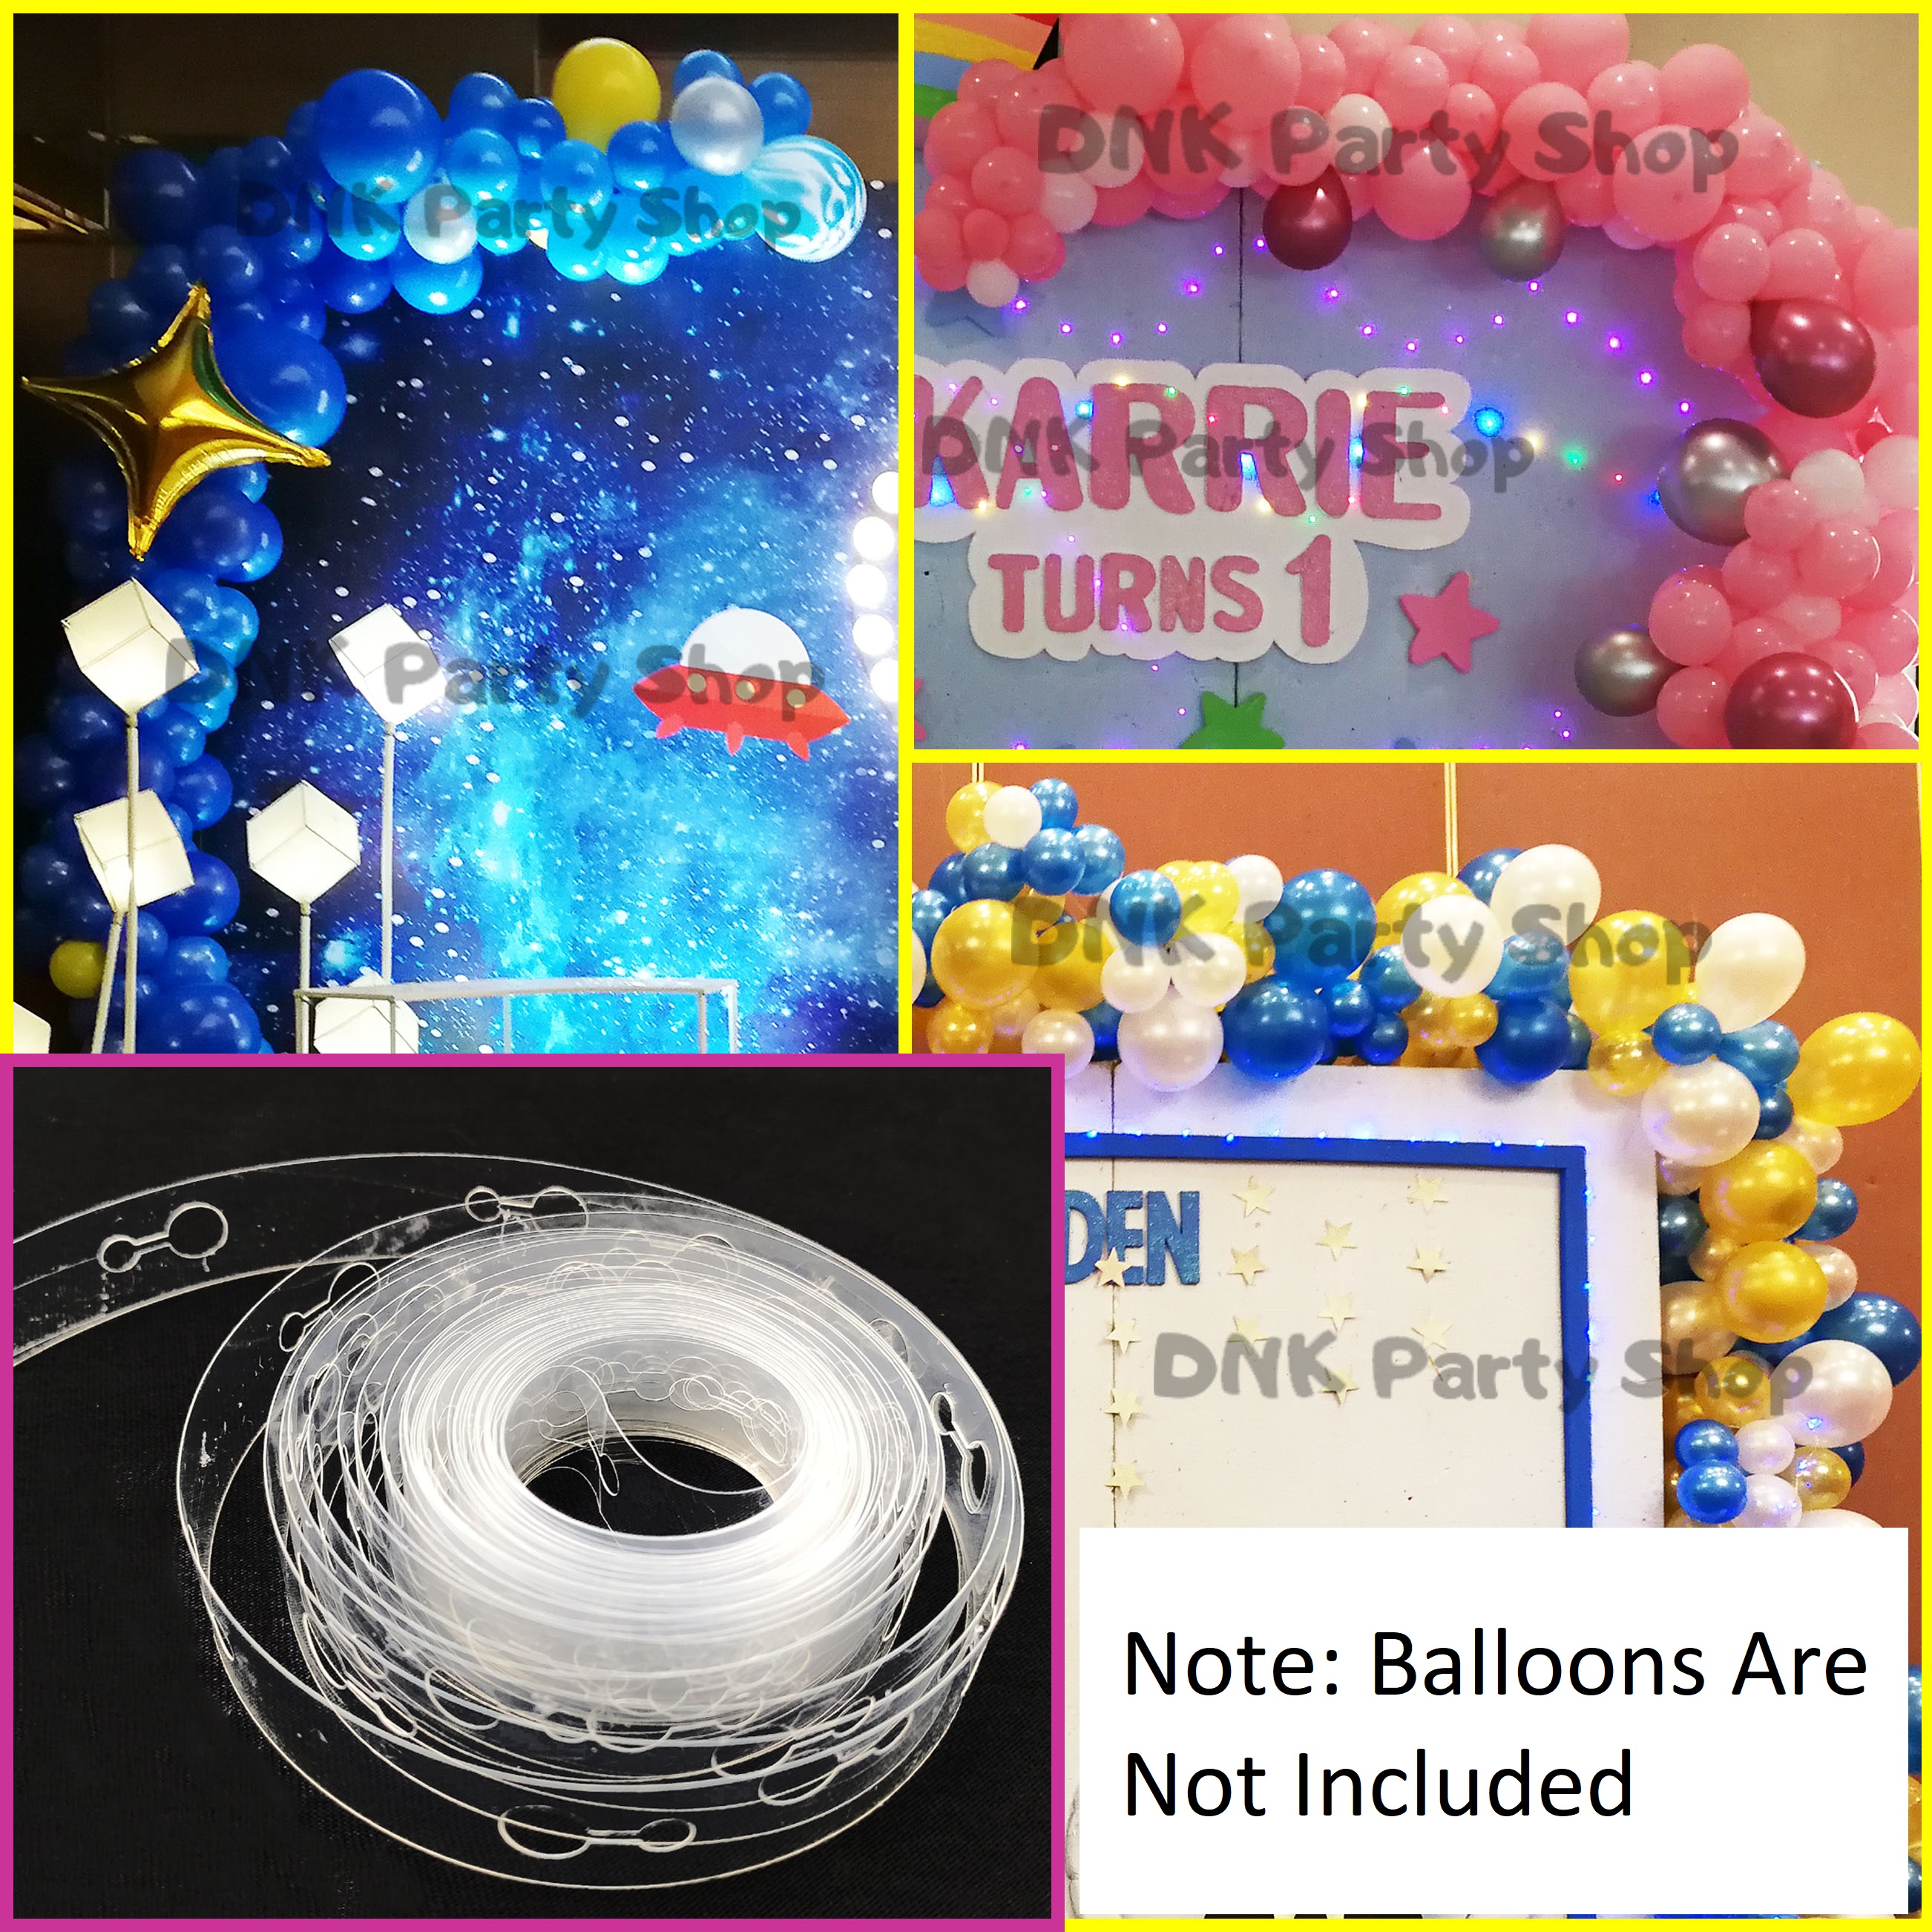 100 pcs Balloon Double Sided Adhesive Glue Dots Transparent Gel Tape Roll  Party Decorations gluedots